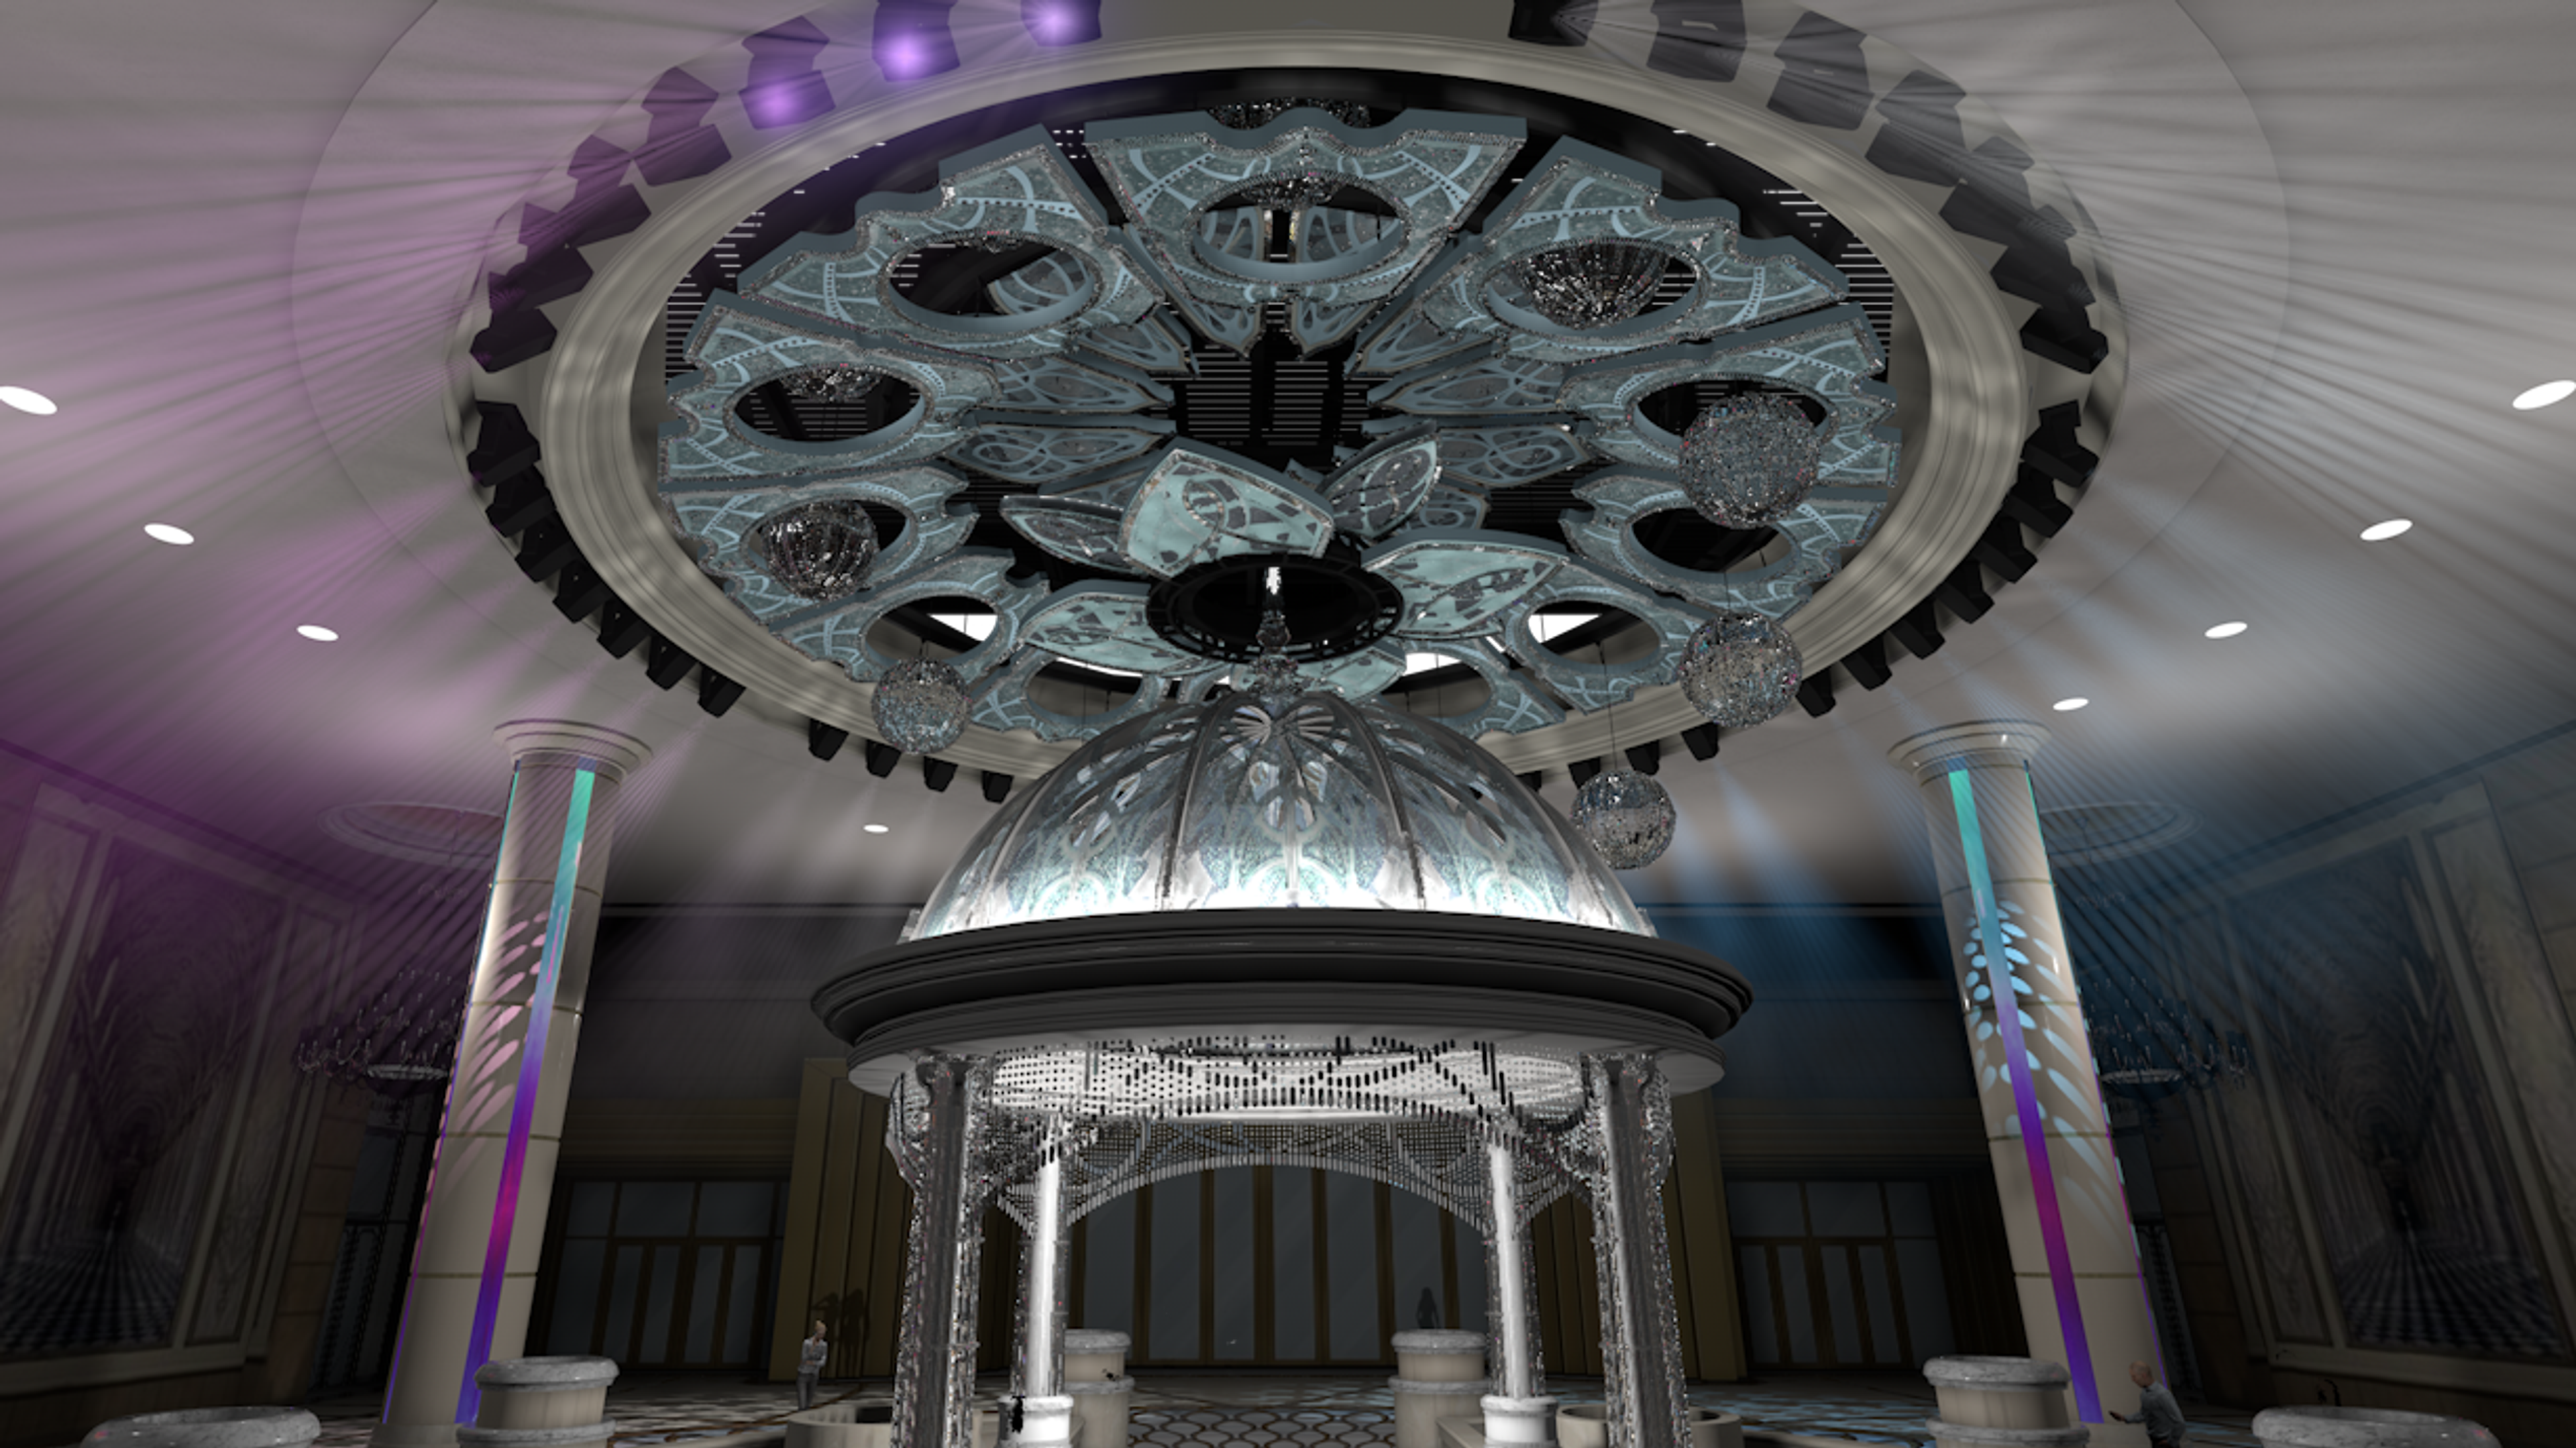 Architectural kinetic Lous flower sculpture installed in centre of grand lobby with chandeliers and light displays